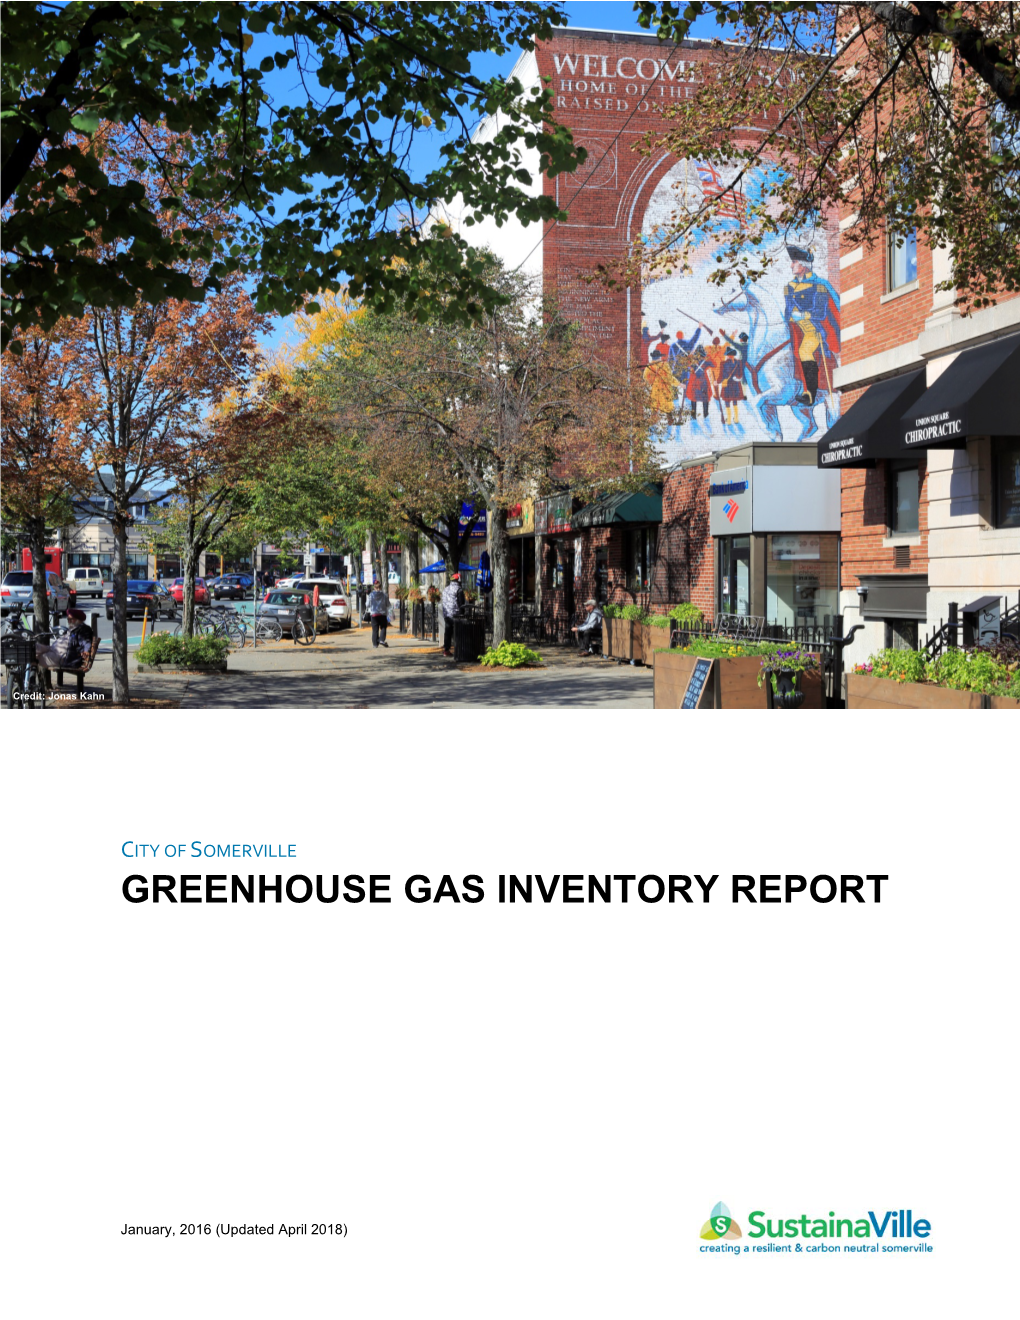 Greenhouse Gas Inventory Report